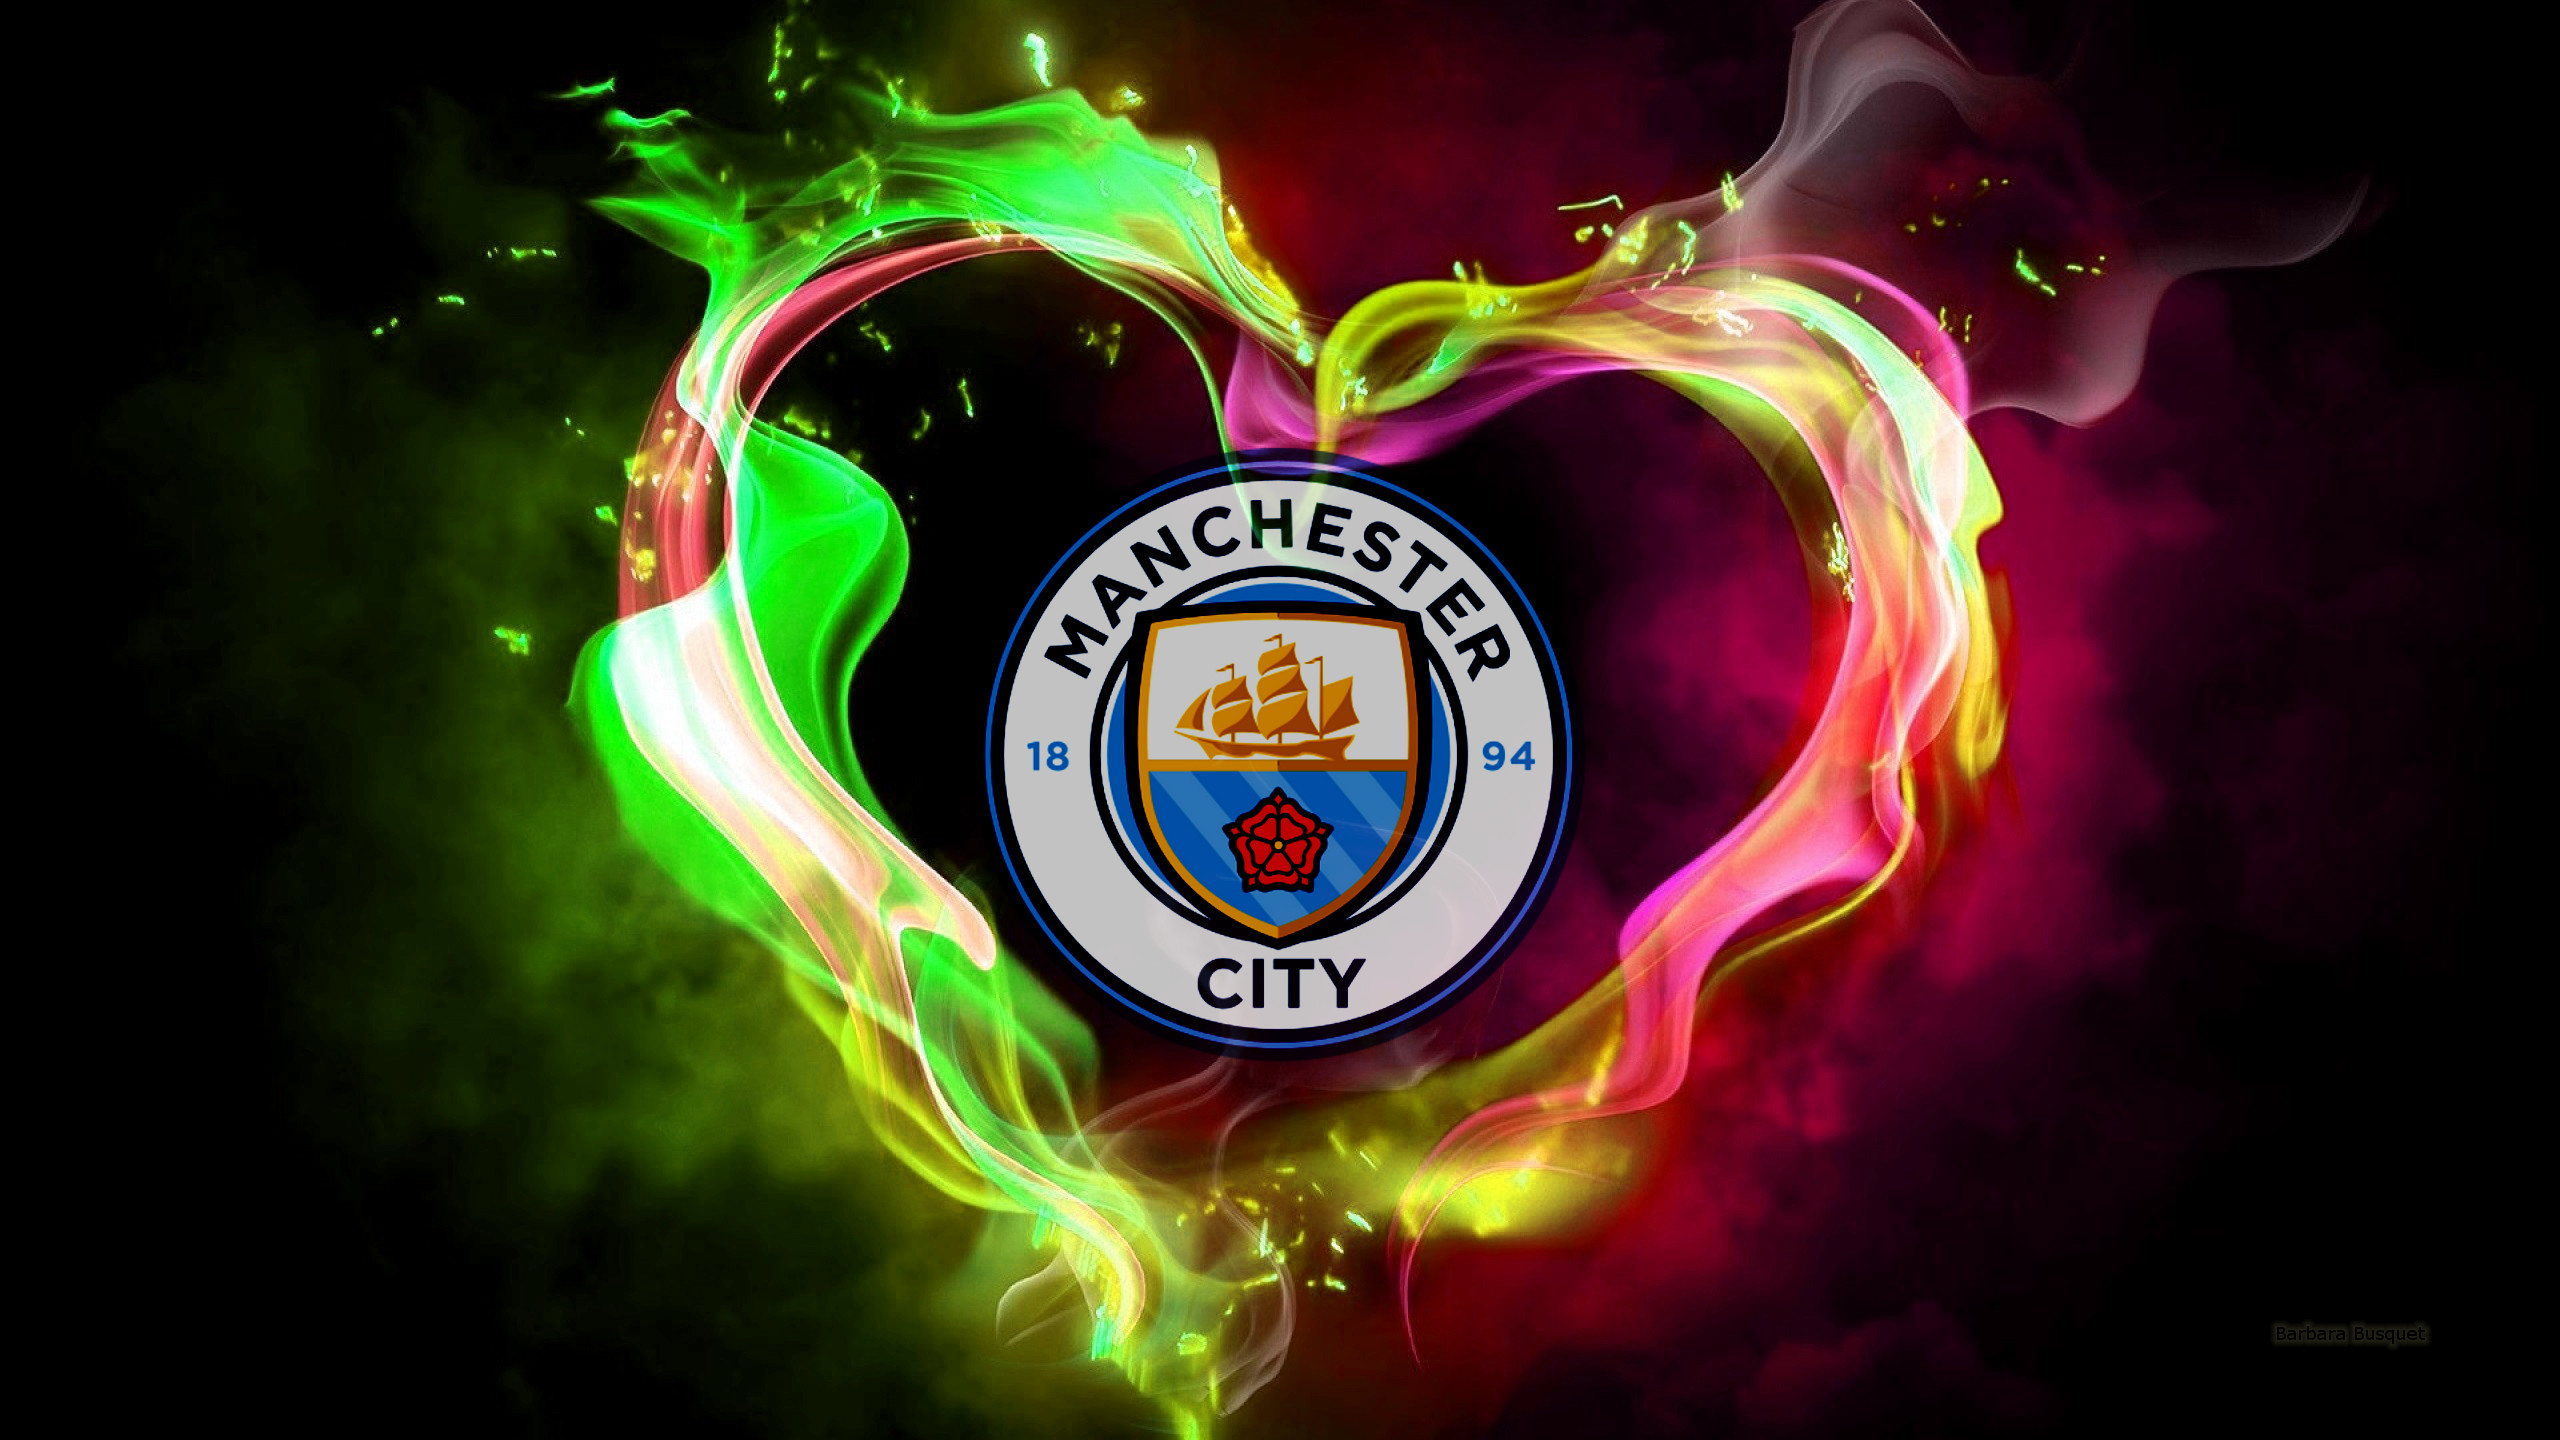 🔥 Free Download Manchester City Fc Hd Wallpaper Background Image